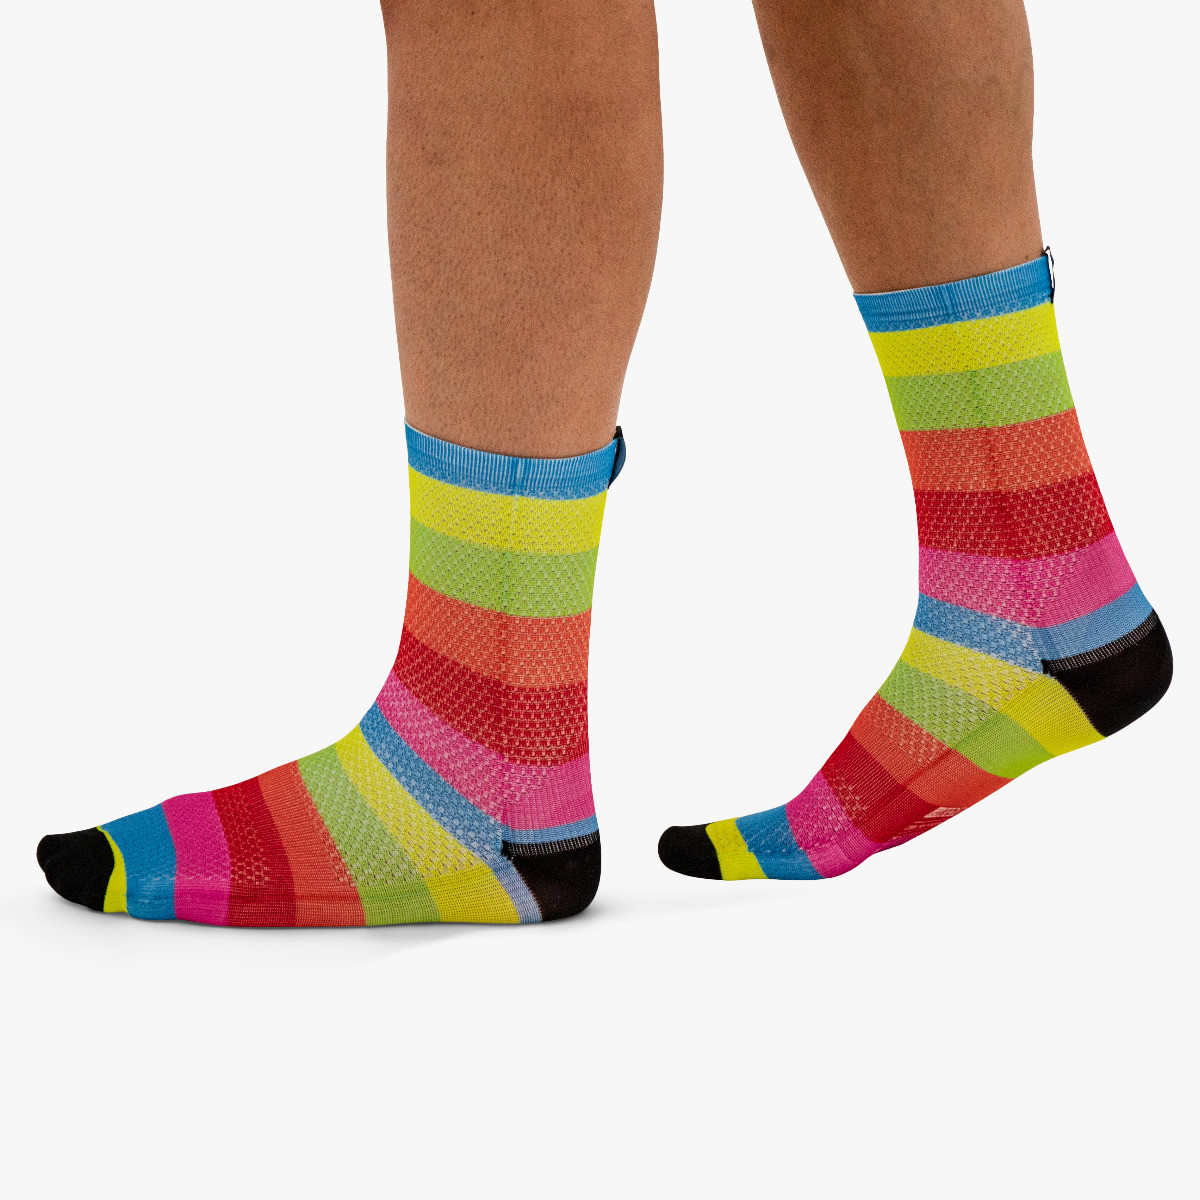 cycling performance socks men women scicon collection socks220